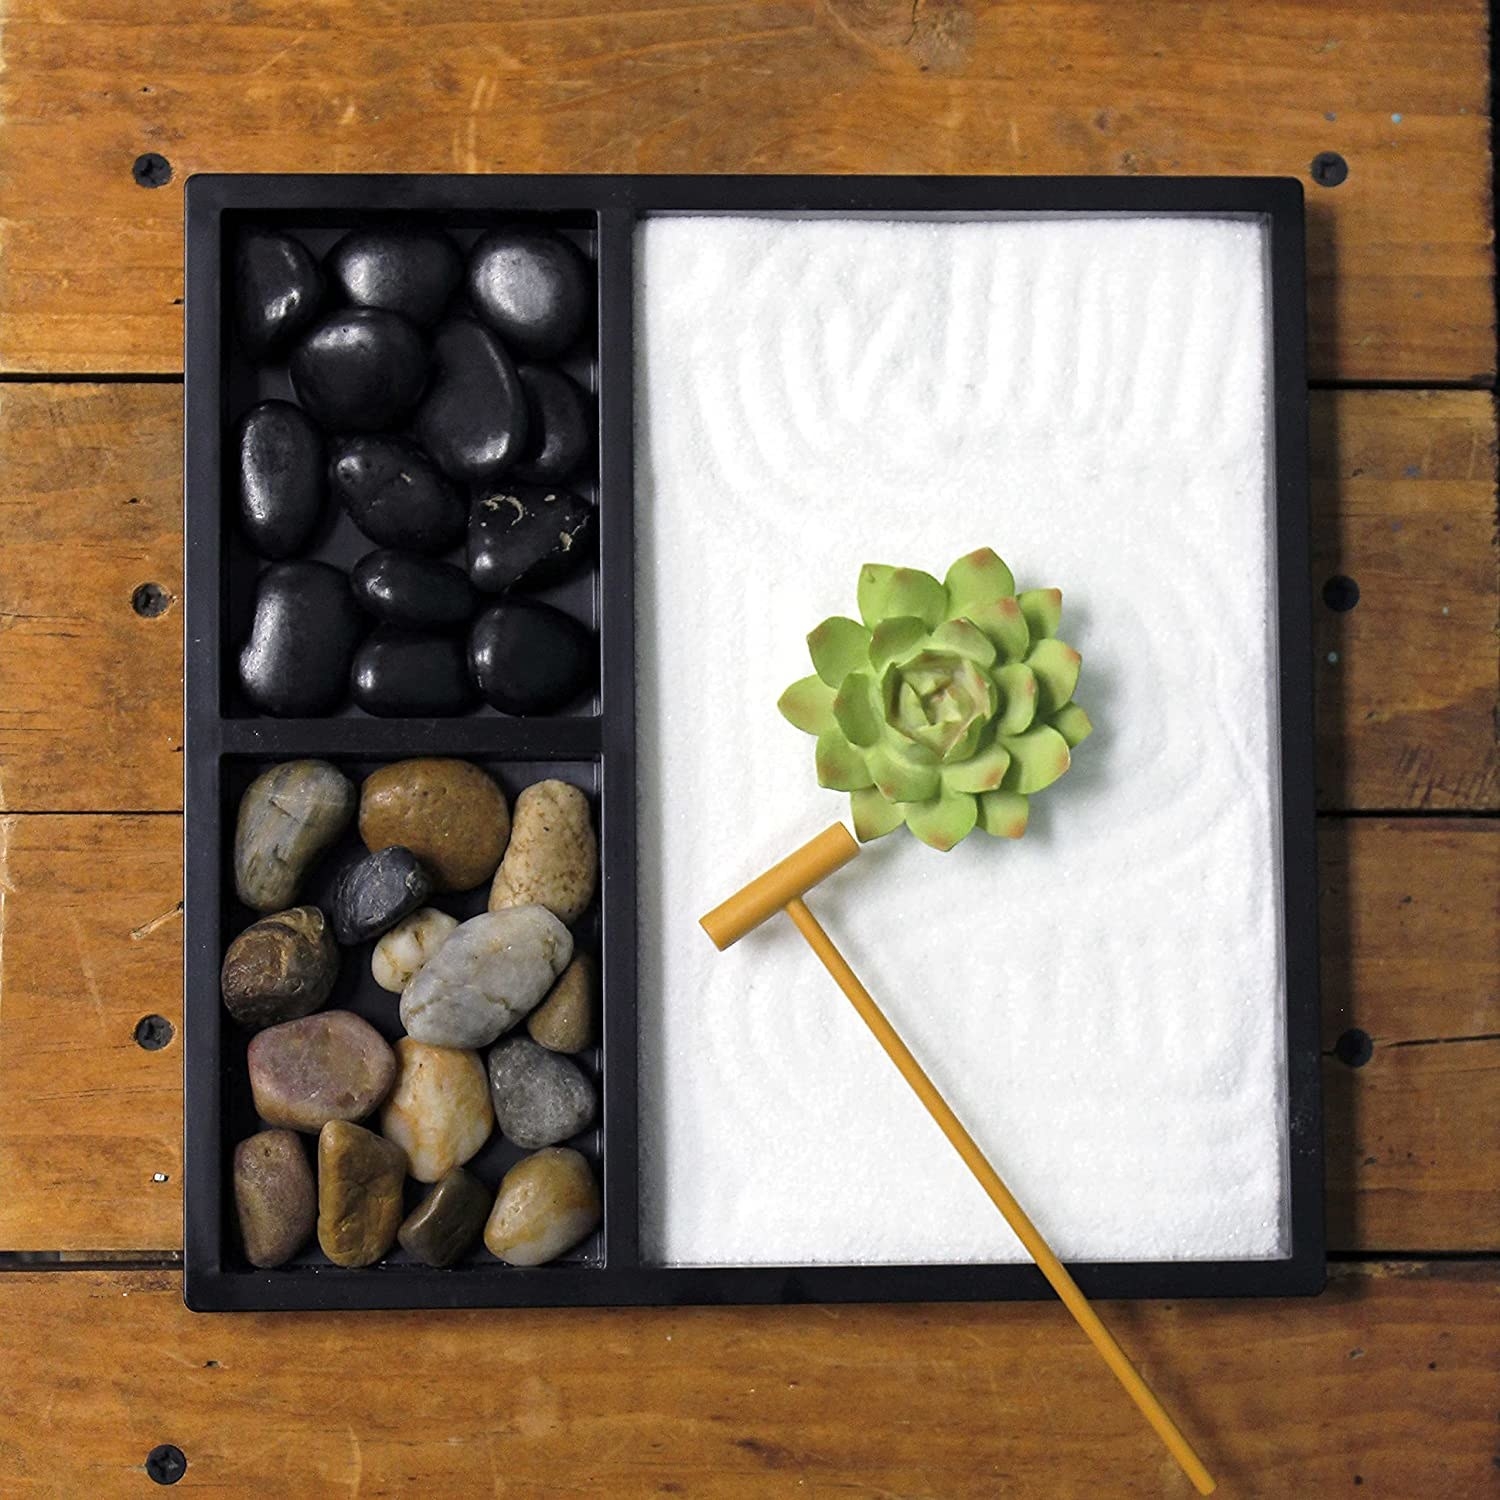 a garden with stones, a rake, and sand